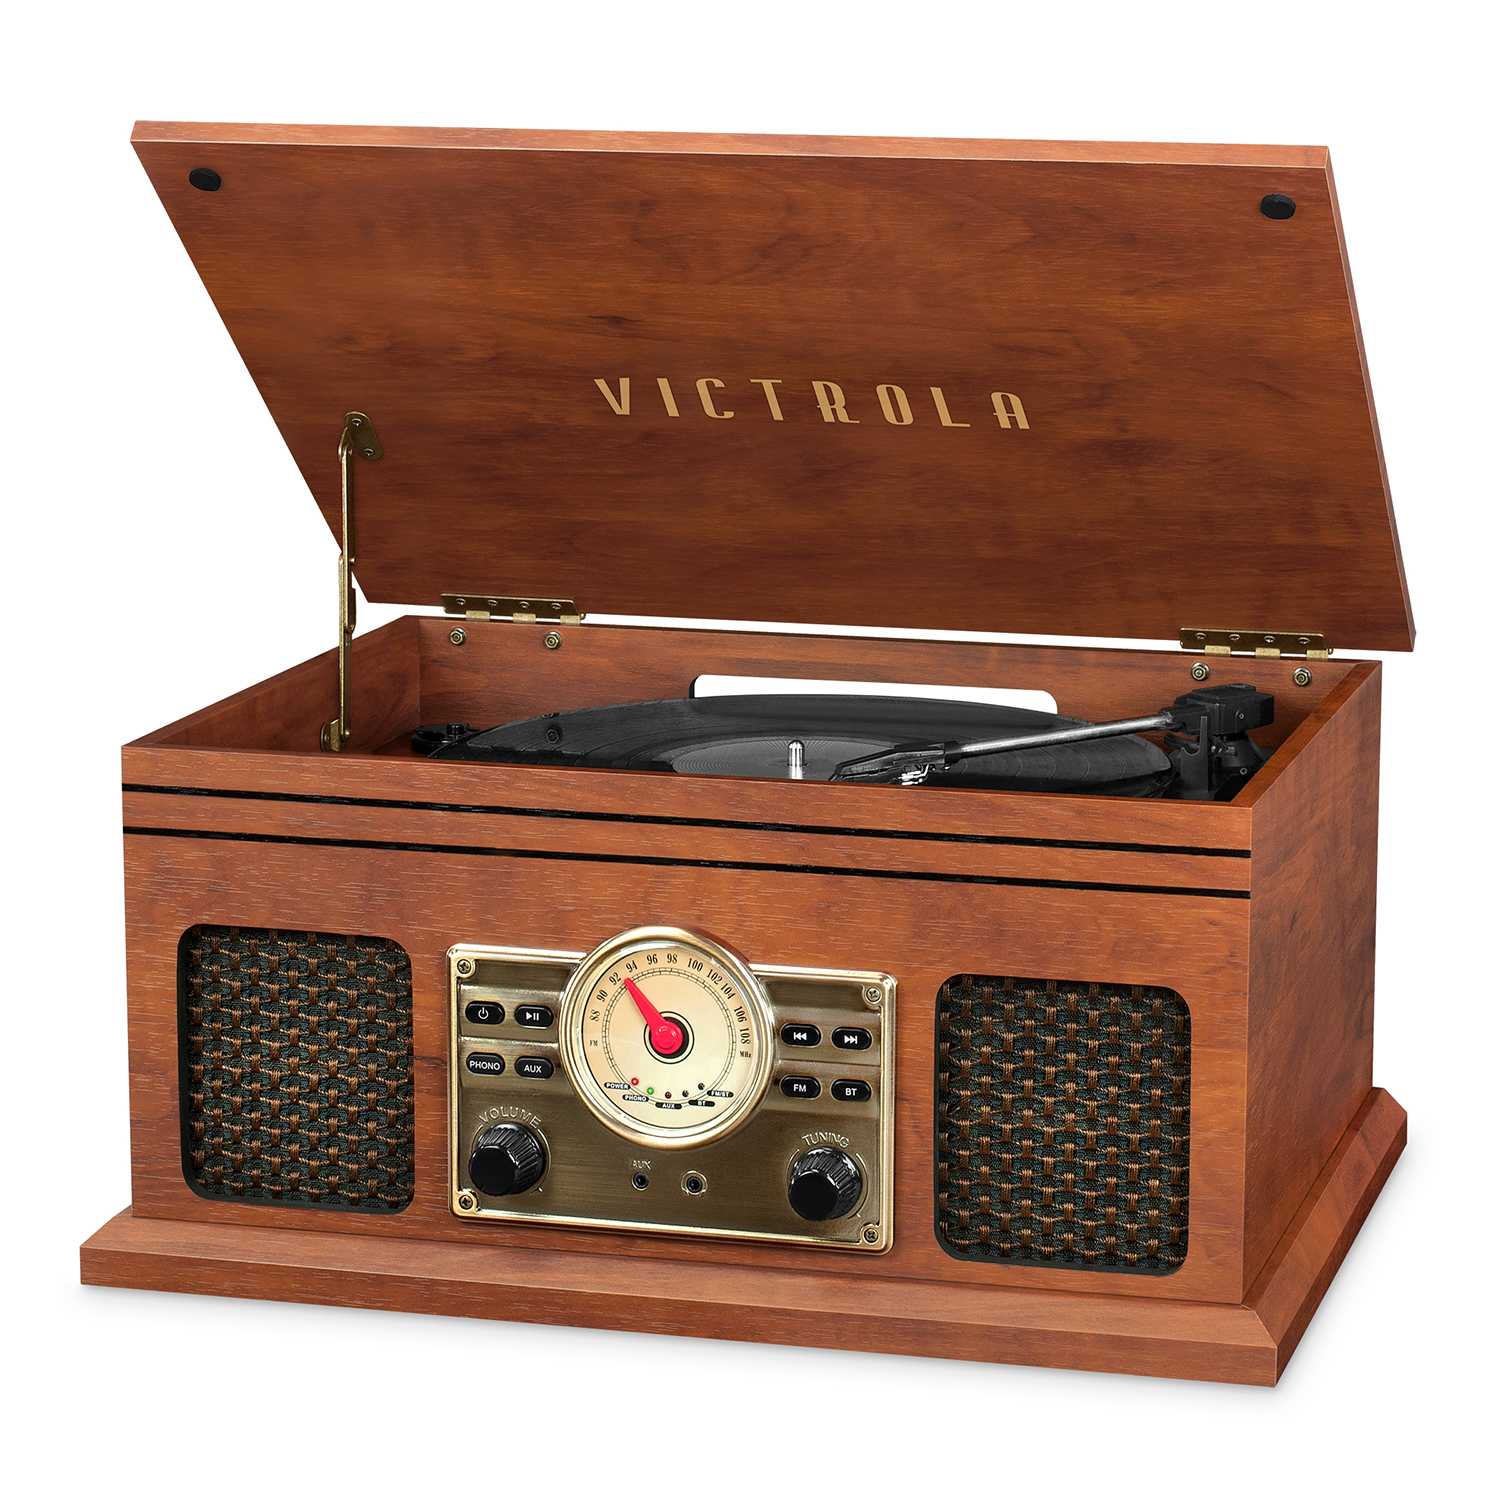 Victrola 4-in-1 Nostalgic Bluetooth Turntable with 3-Speed Record Player and FM Radio - image 1 of 4